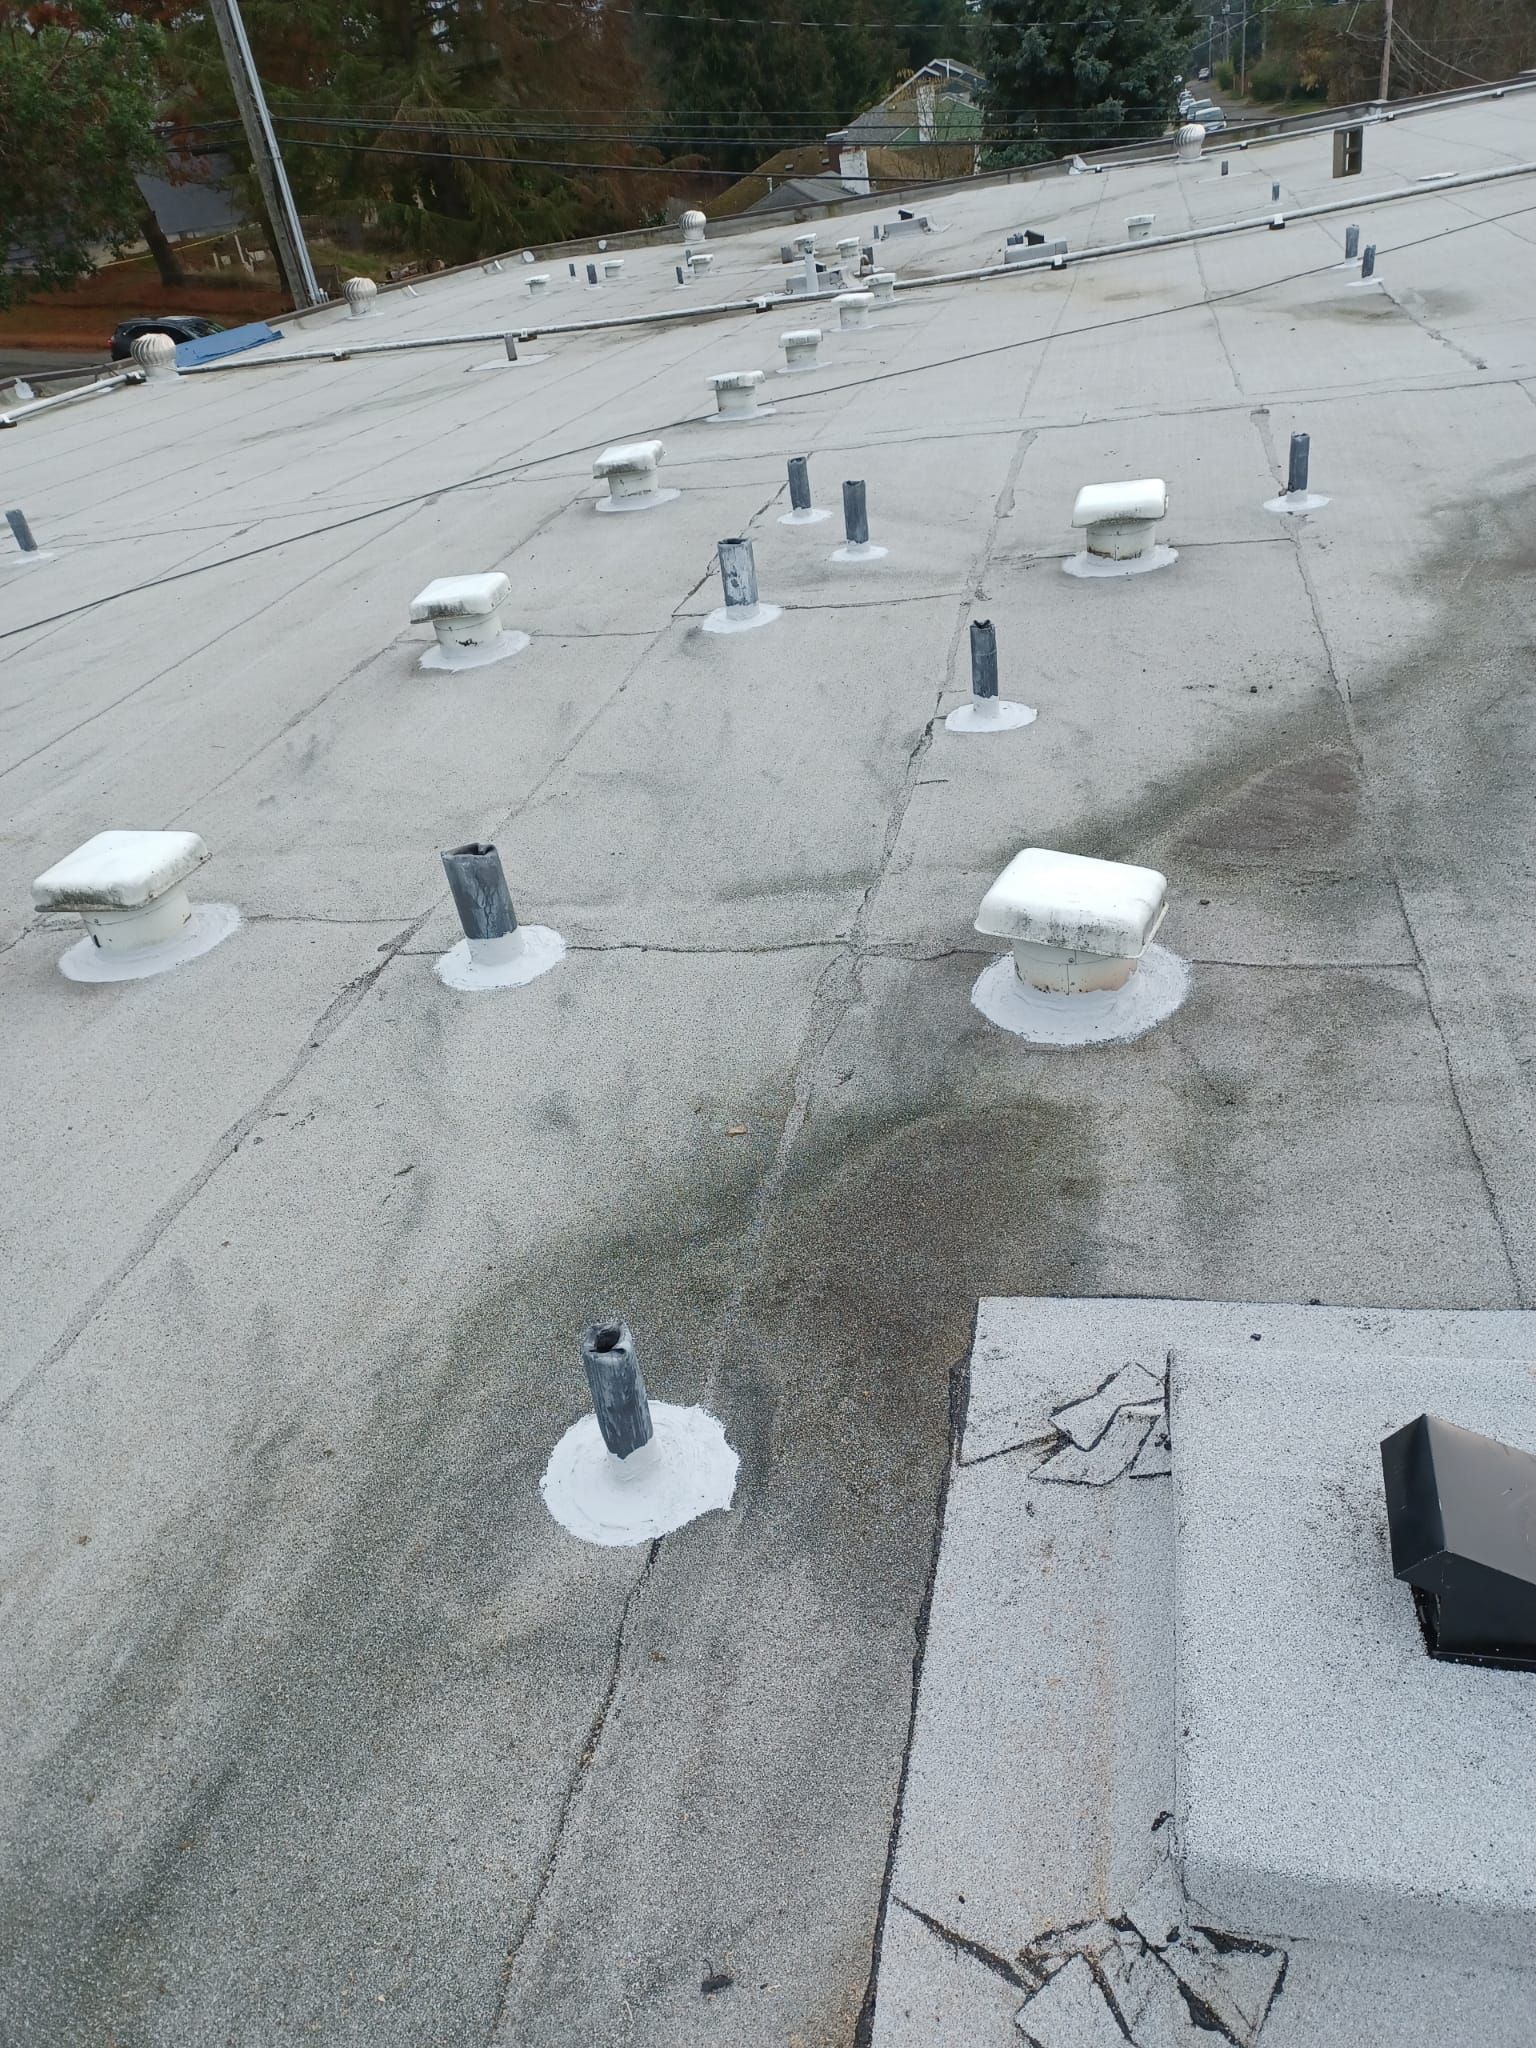 Commercial roof completed with maintenance in bellevue done. Several patches have been applied to penetrations.